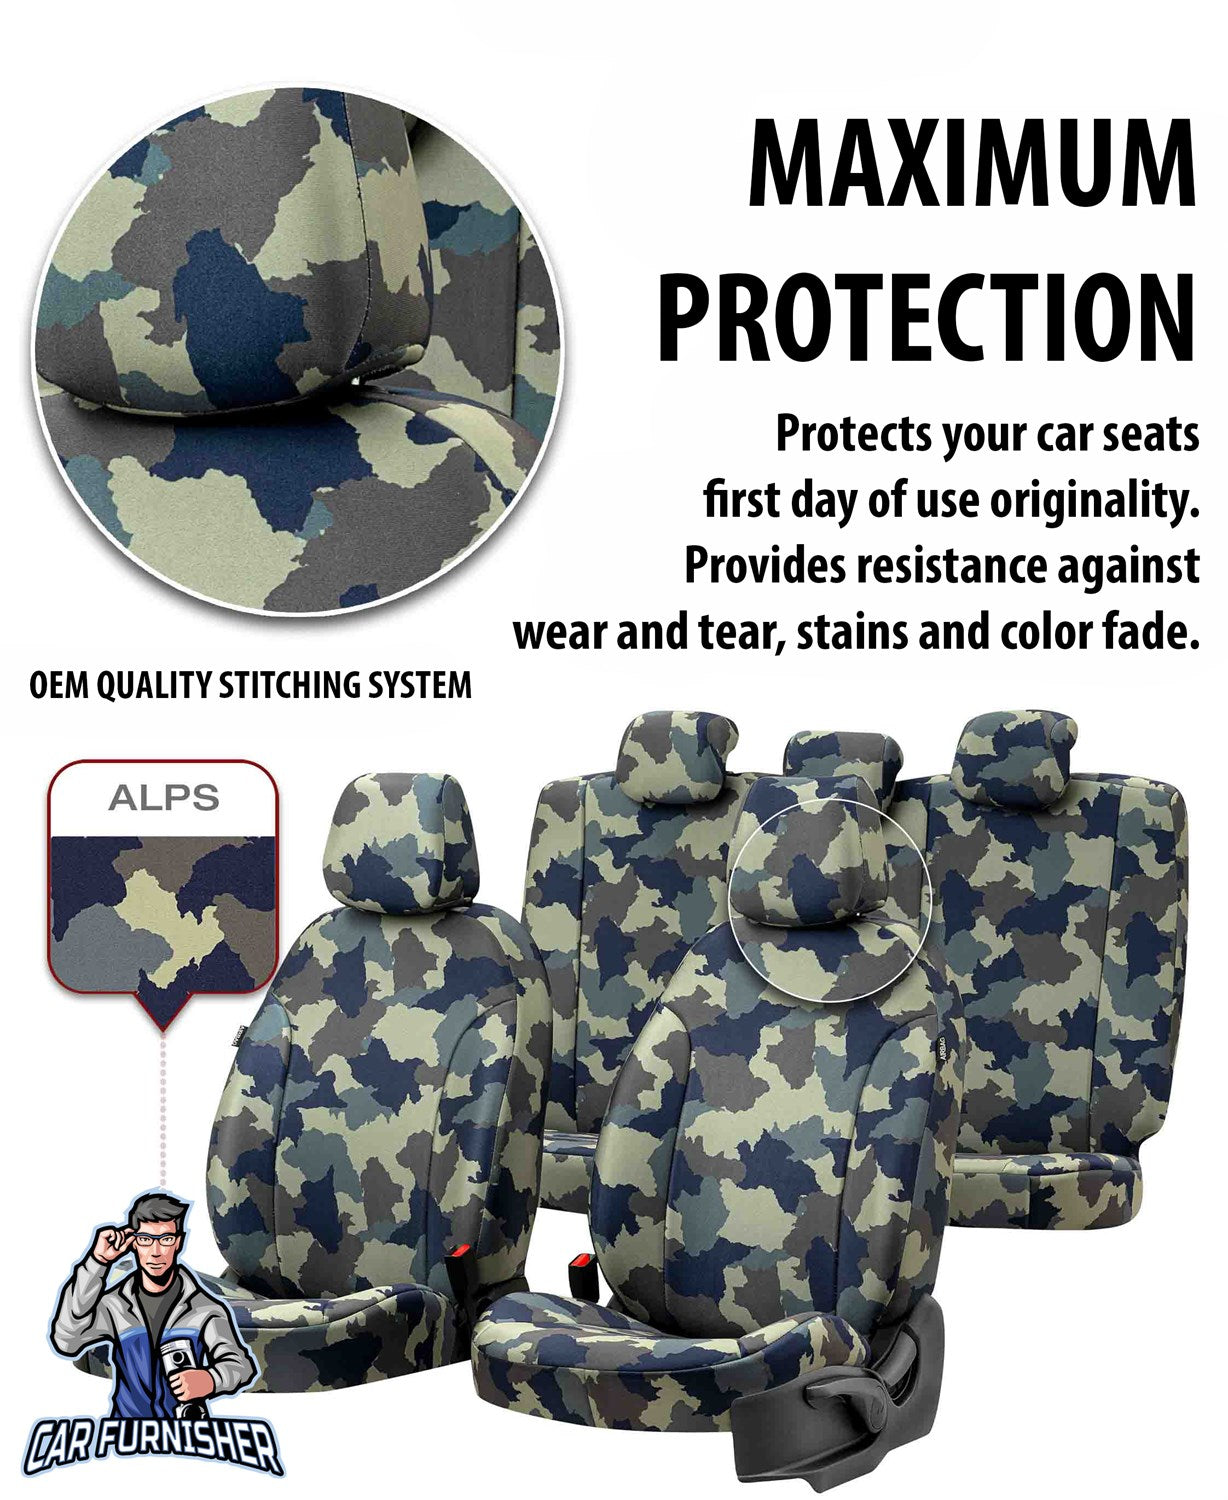 Ford S-Max Seat Covers Camouflage Waterproof Design Alps Camo Waterproof Fabric